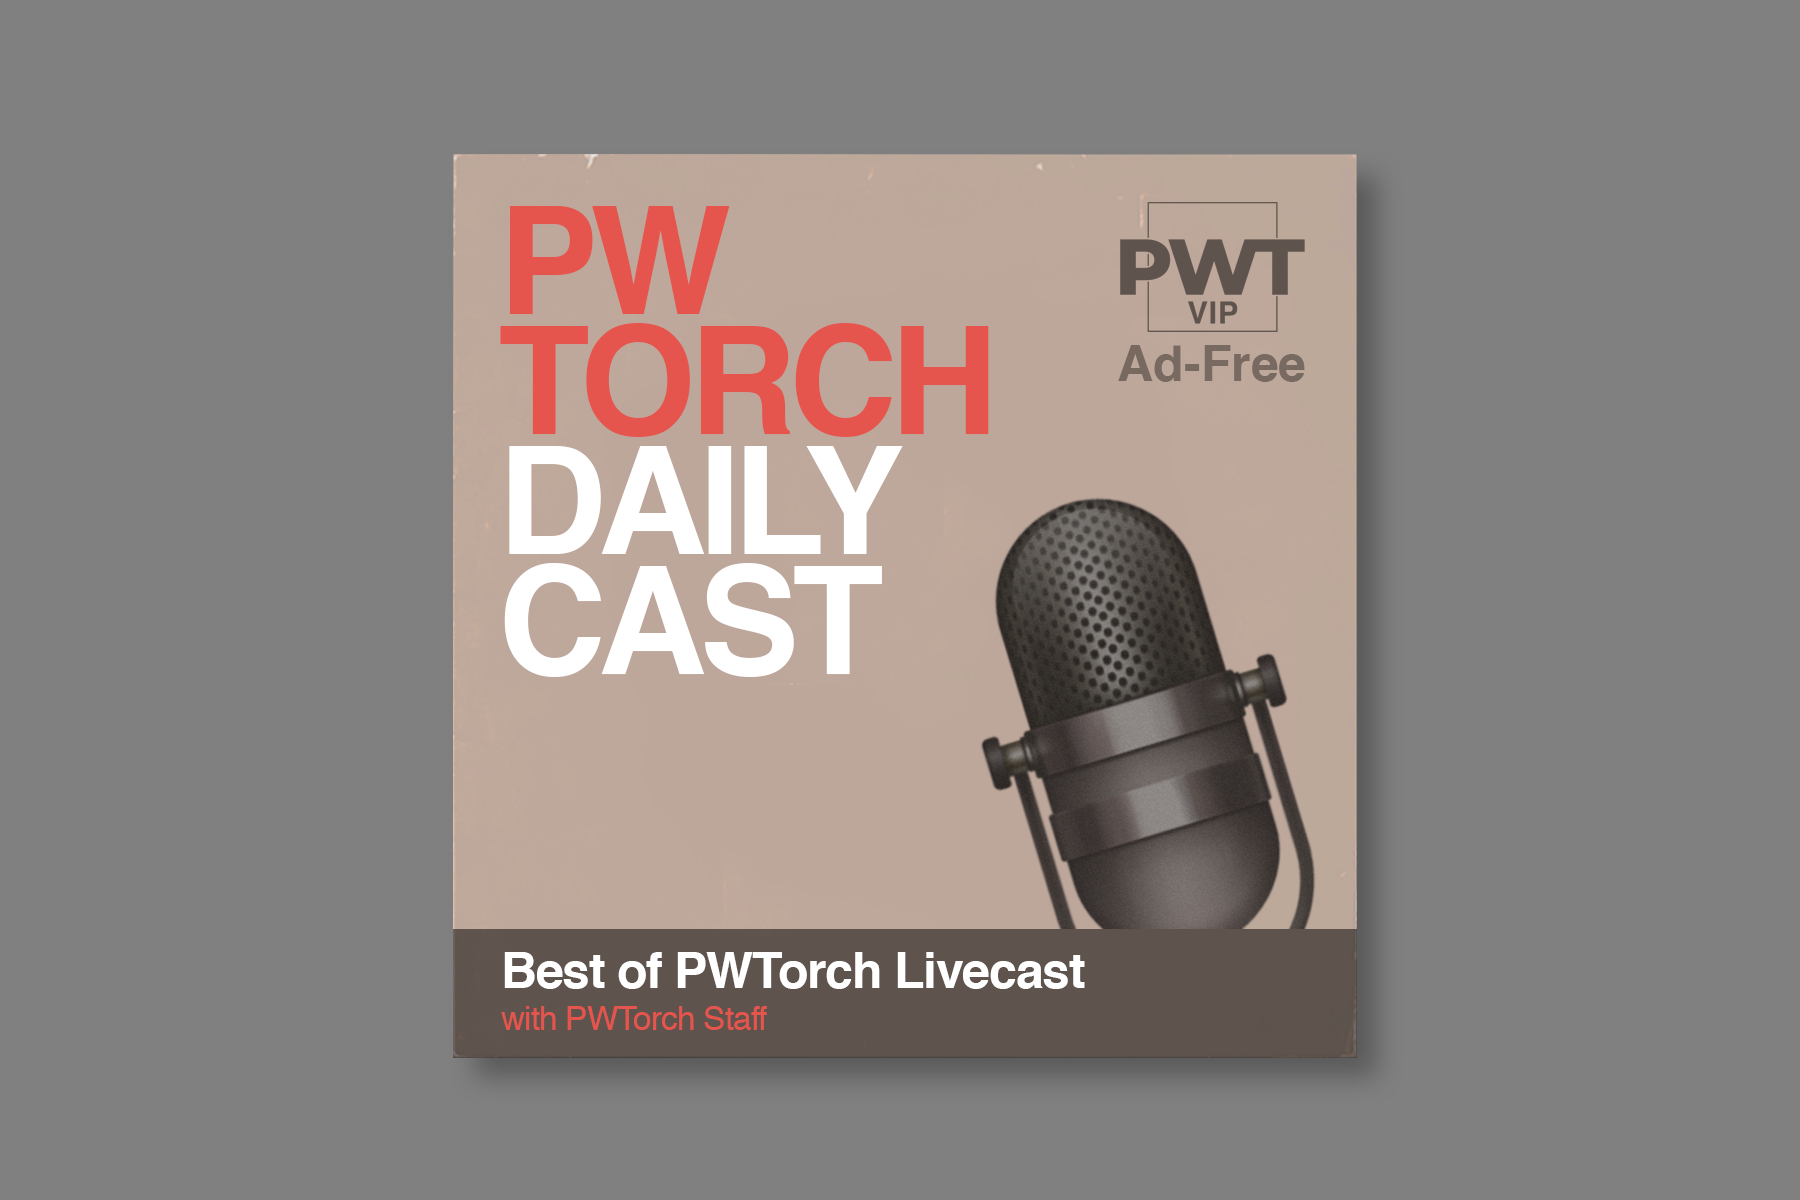 VIP AUDIO 7/15 – PWTorch Dailycast – Best of PWTorch Livecast (AD-FREE): (7-14-2019) WWE Extreme Rules post-show, including Brock Lesnar, who’s next for Kofi Kingston, setting up Summerslam, mor